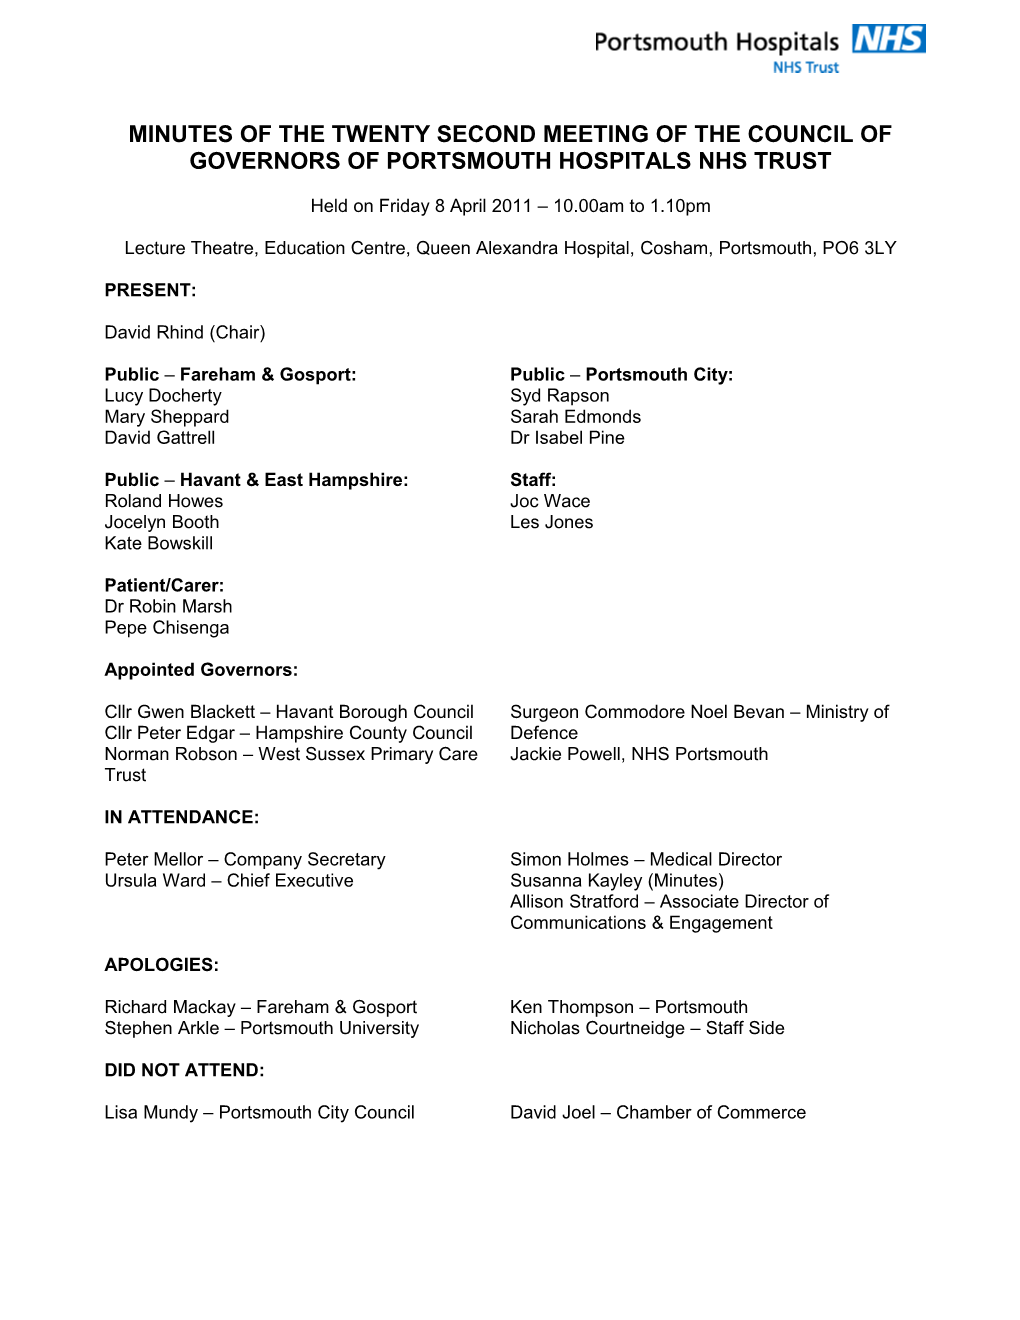 Minutes of the Twenty Second Meeting of the Council of Governors of Portsmouth Hospitals